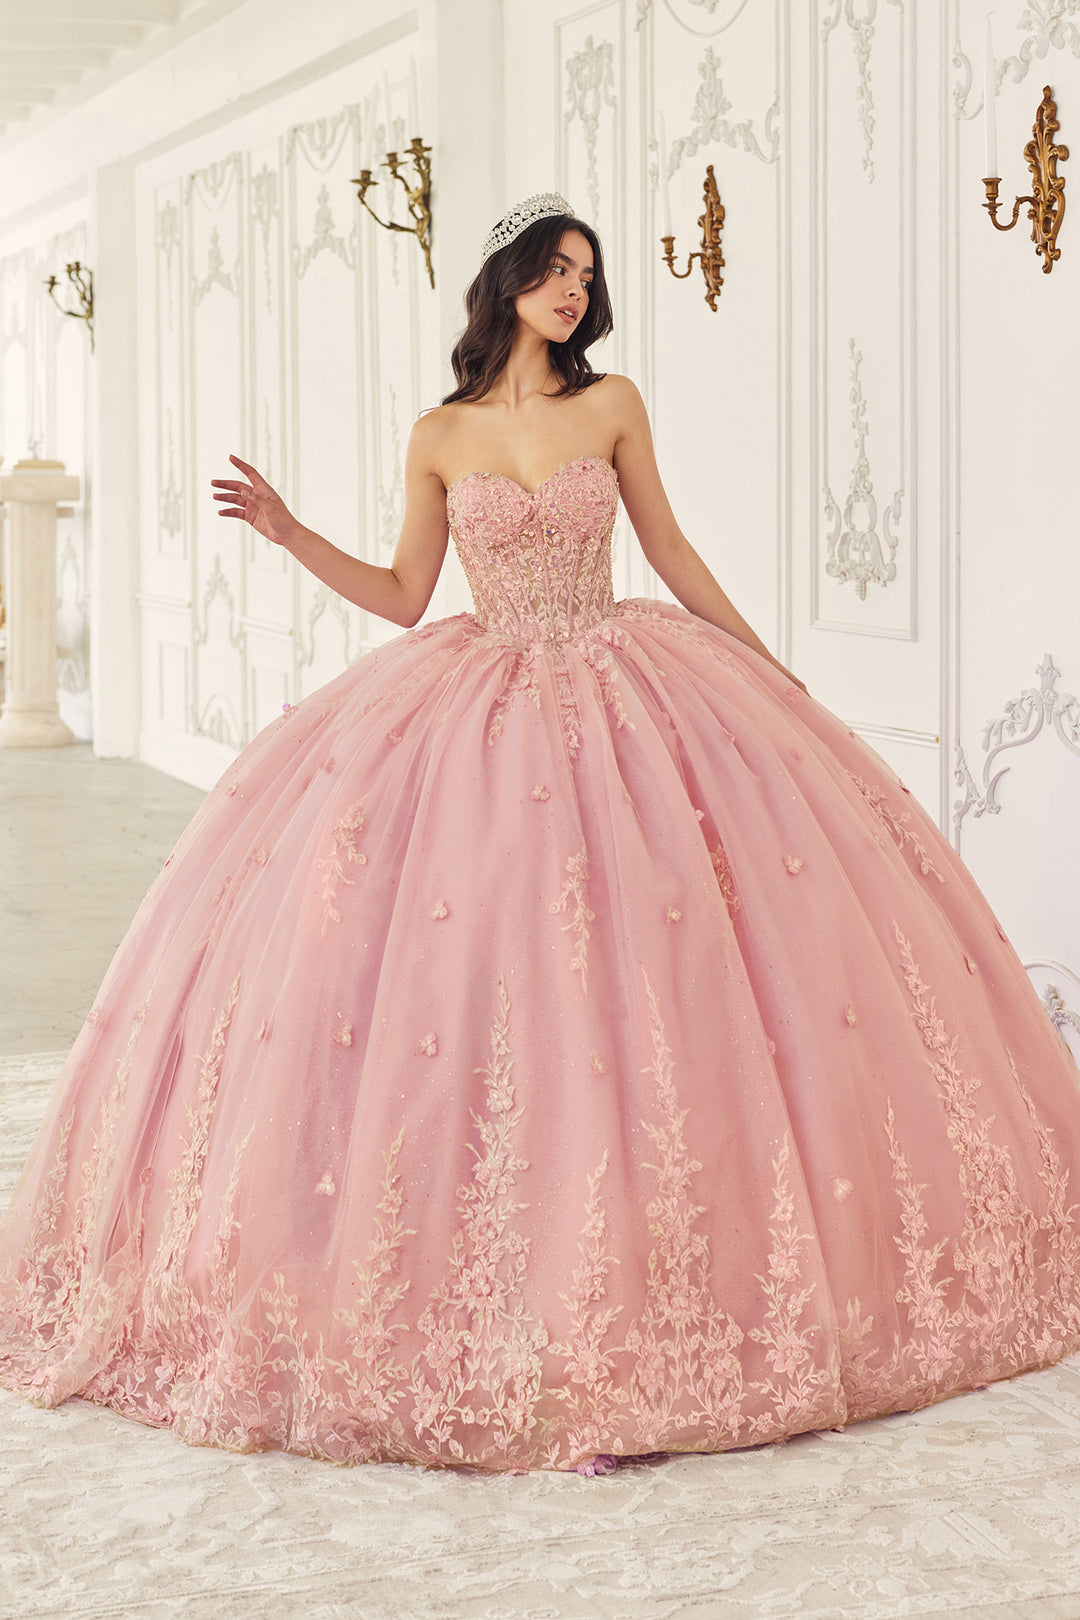 Floral Applique Strapless Cape Ball Gown by Ladivine 15723